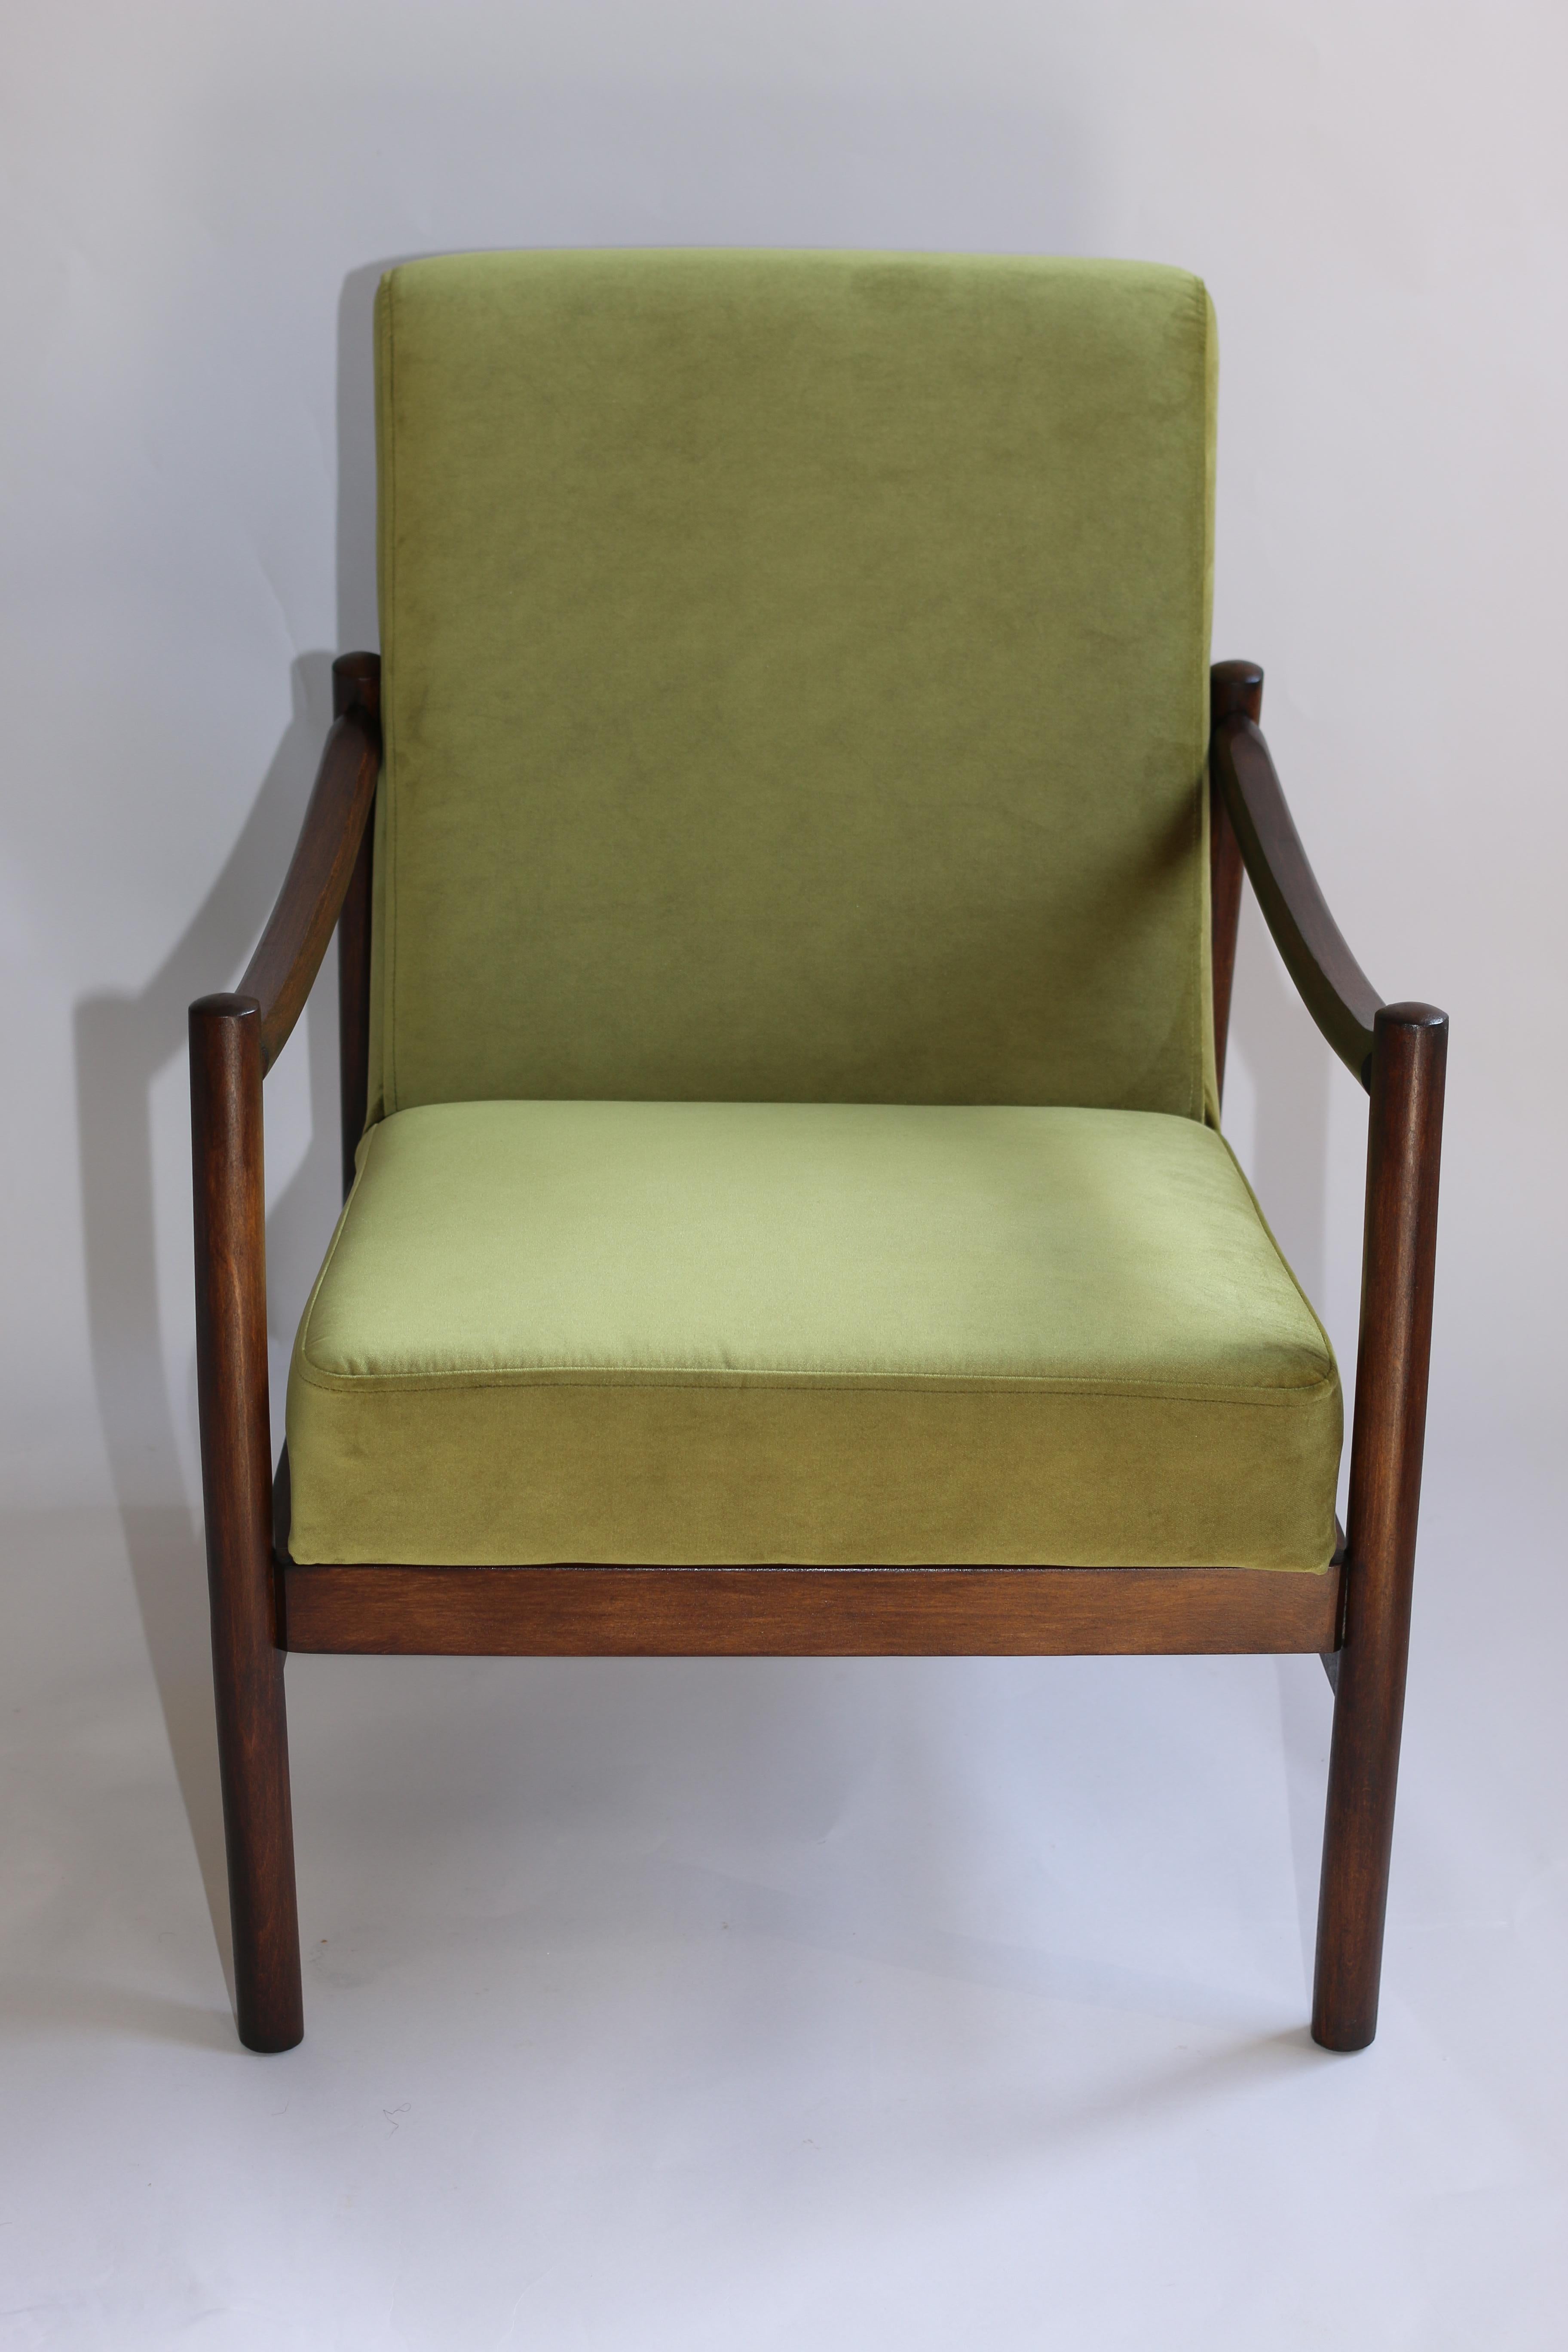 20th Century Polish Vintage Armchairs in Green Velvet from 1970s For Sale